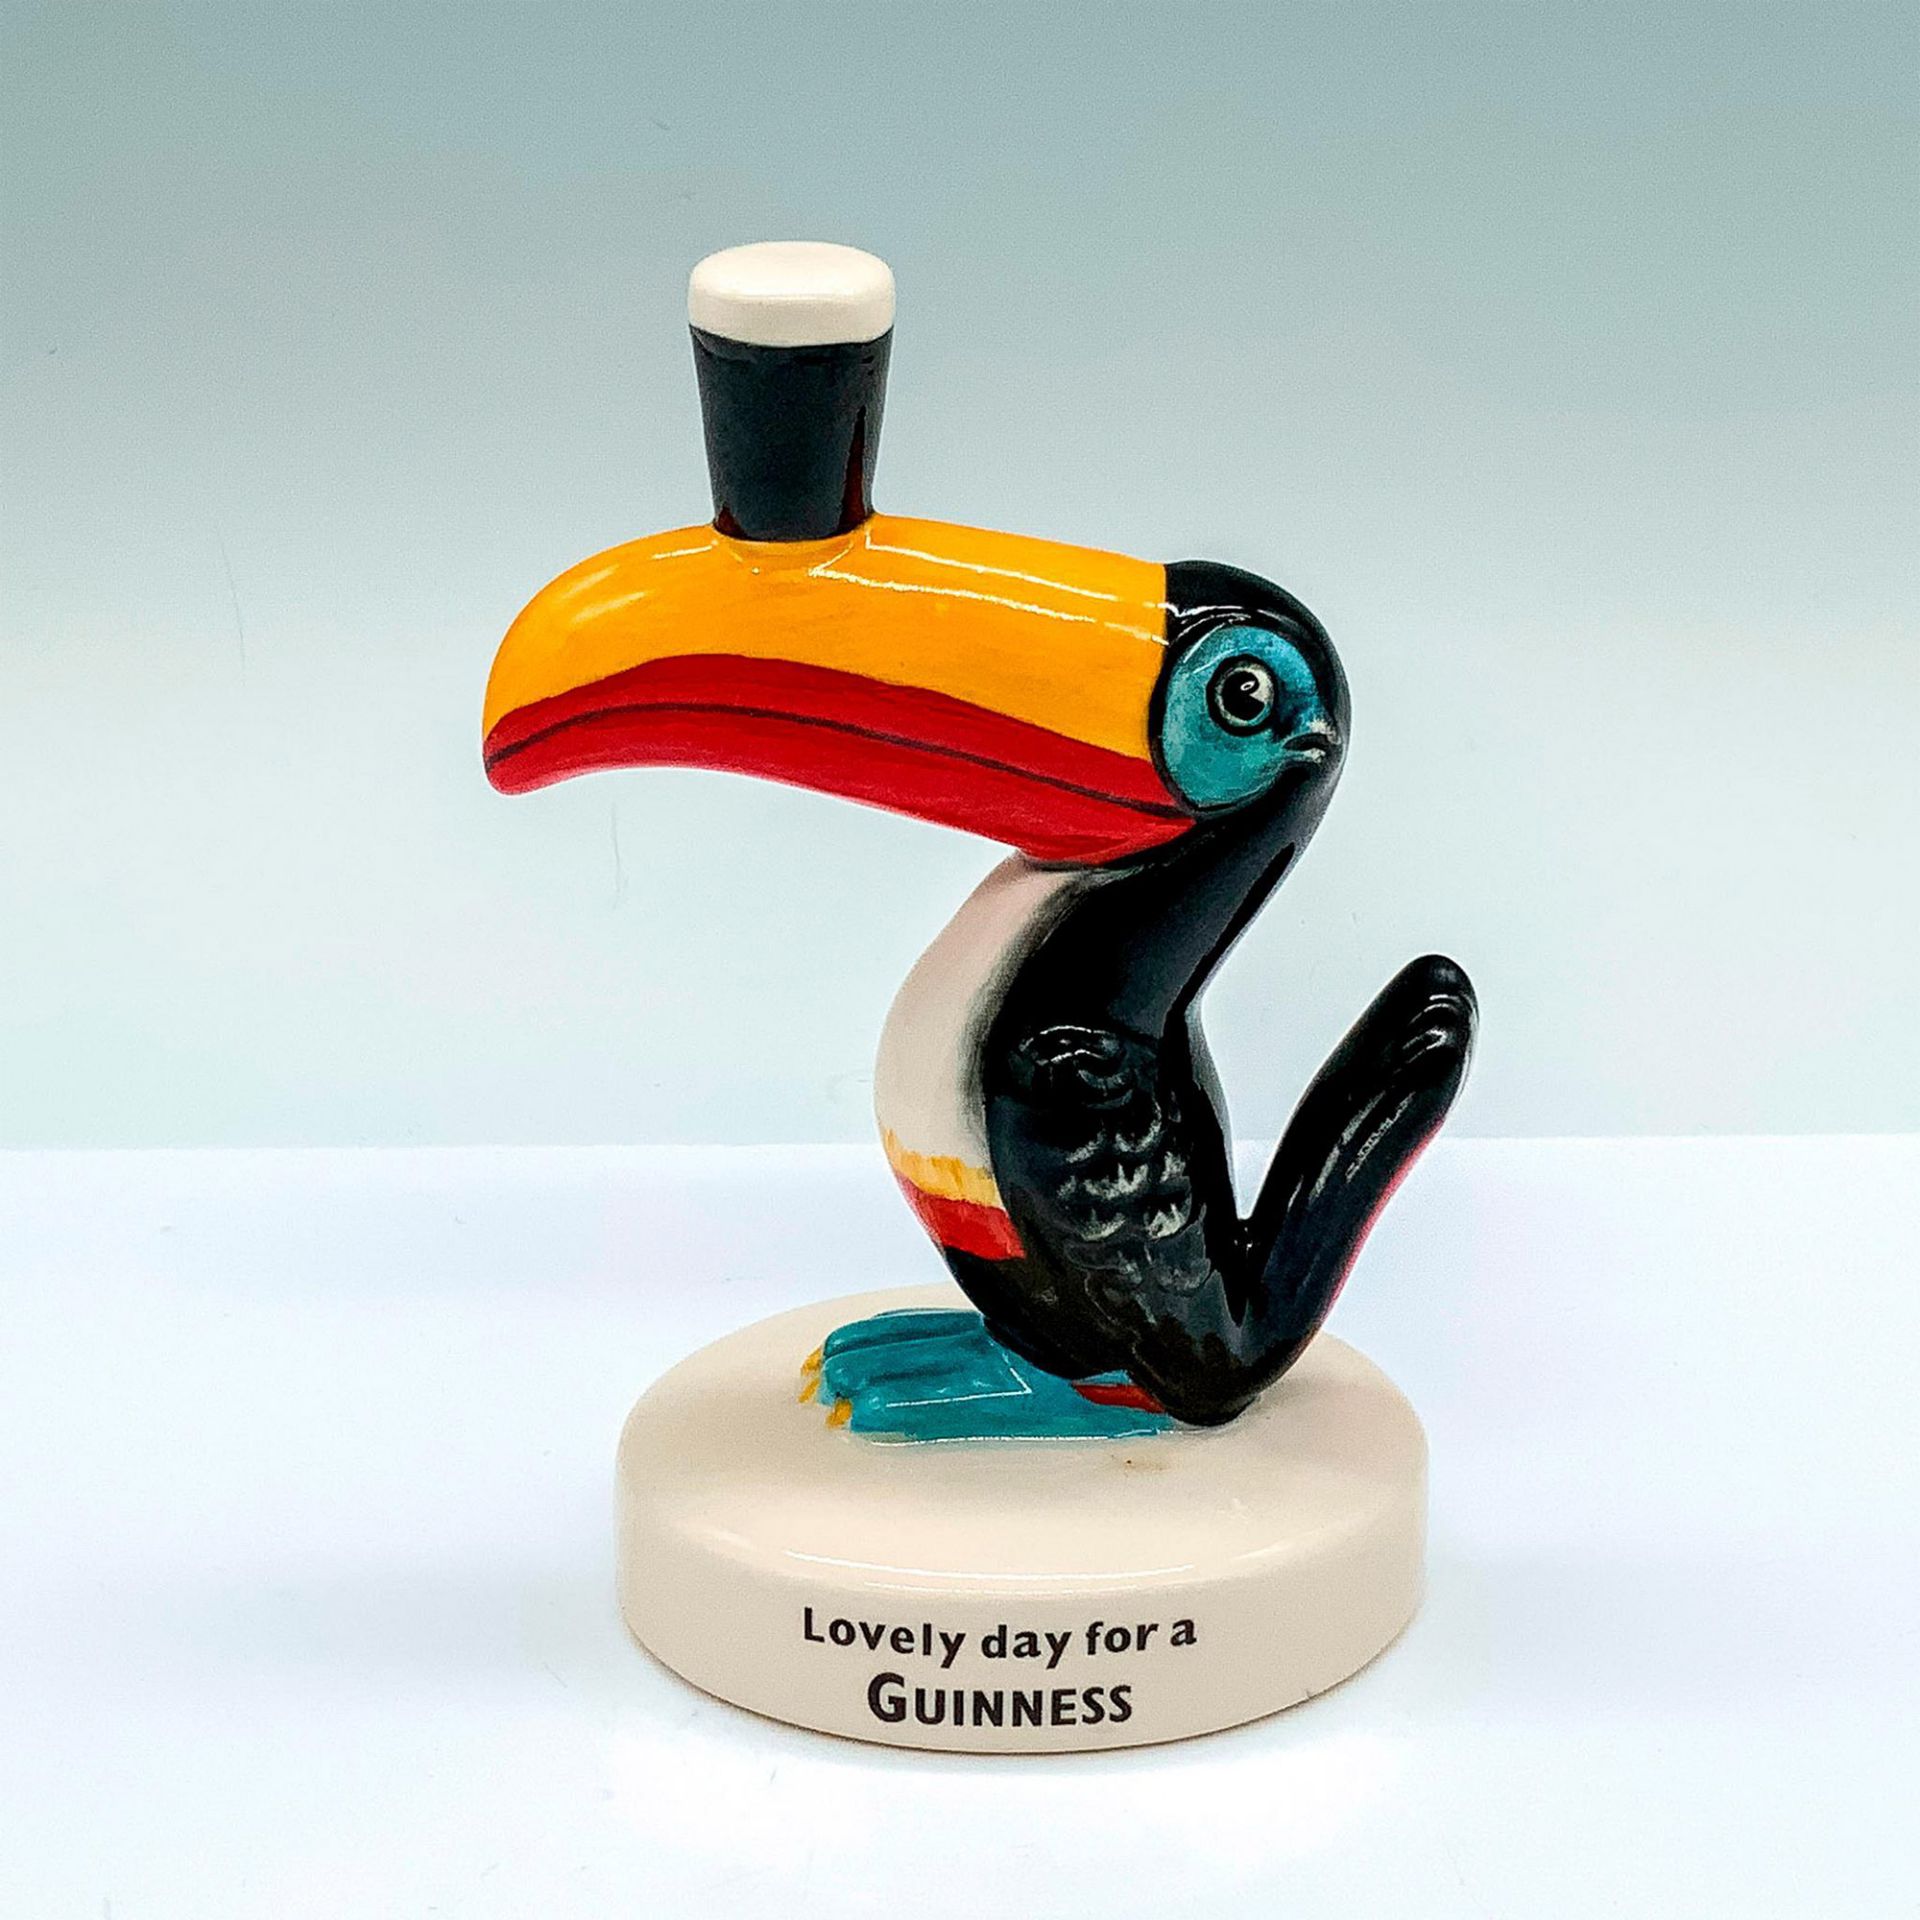 Royal Doulton Figurine for Guinness, Guinness Toucan AC8 - Image 2 of 3